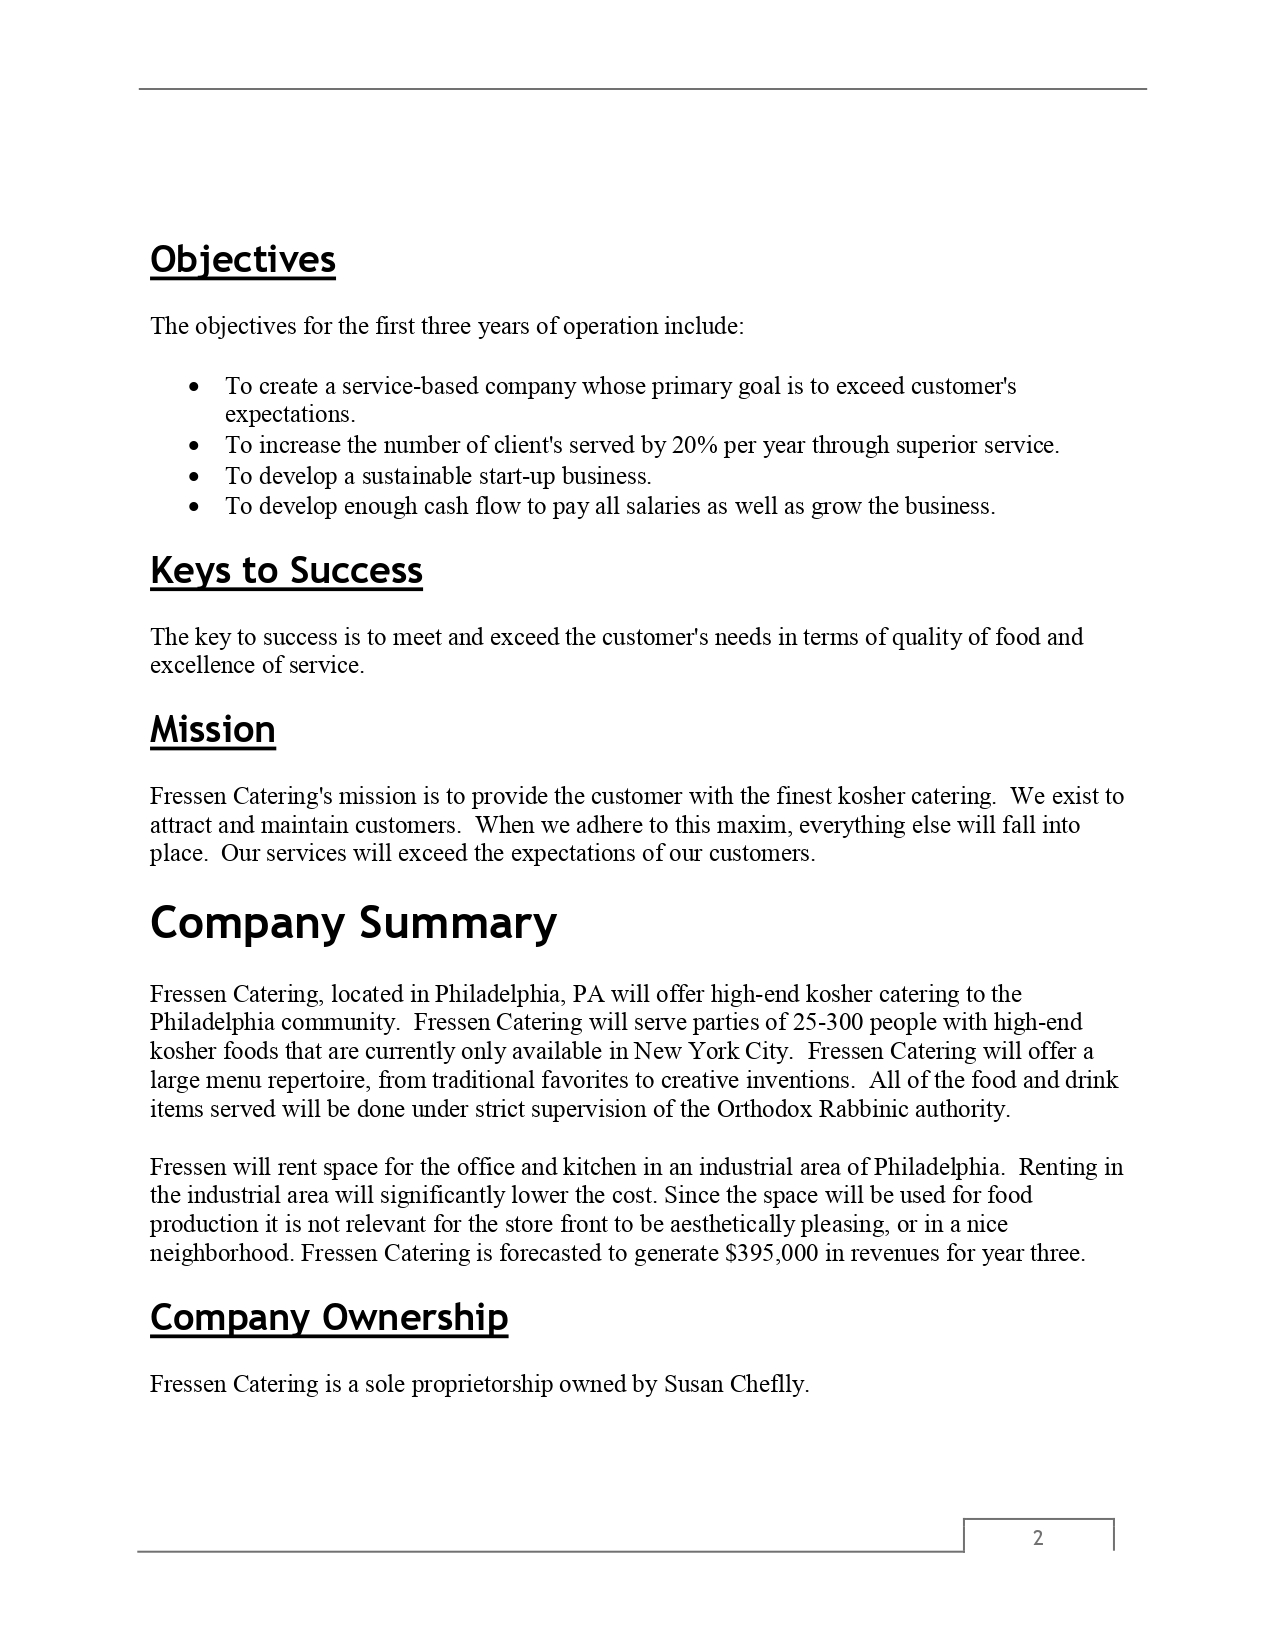 Pro Catering Company Business Plan Template